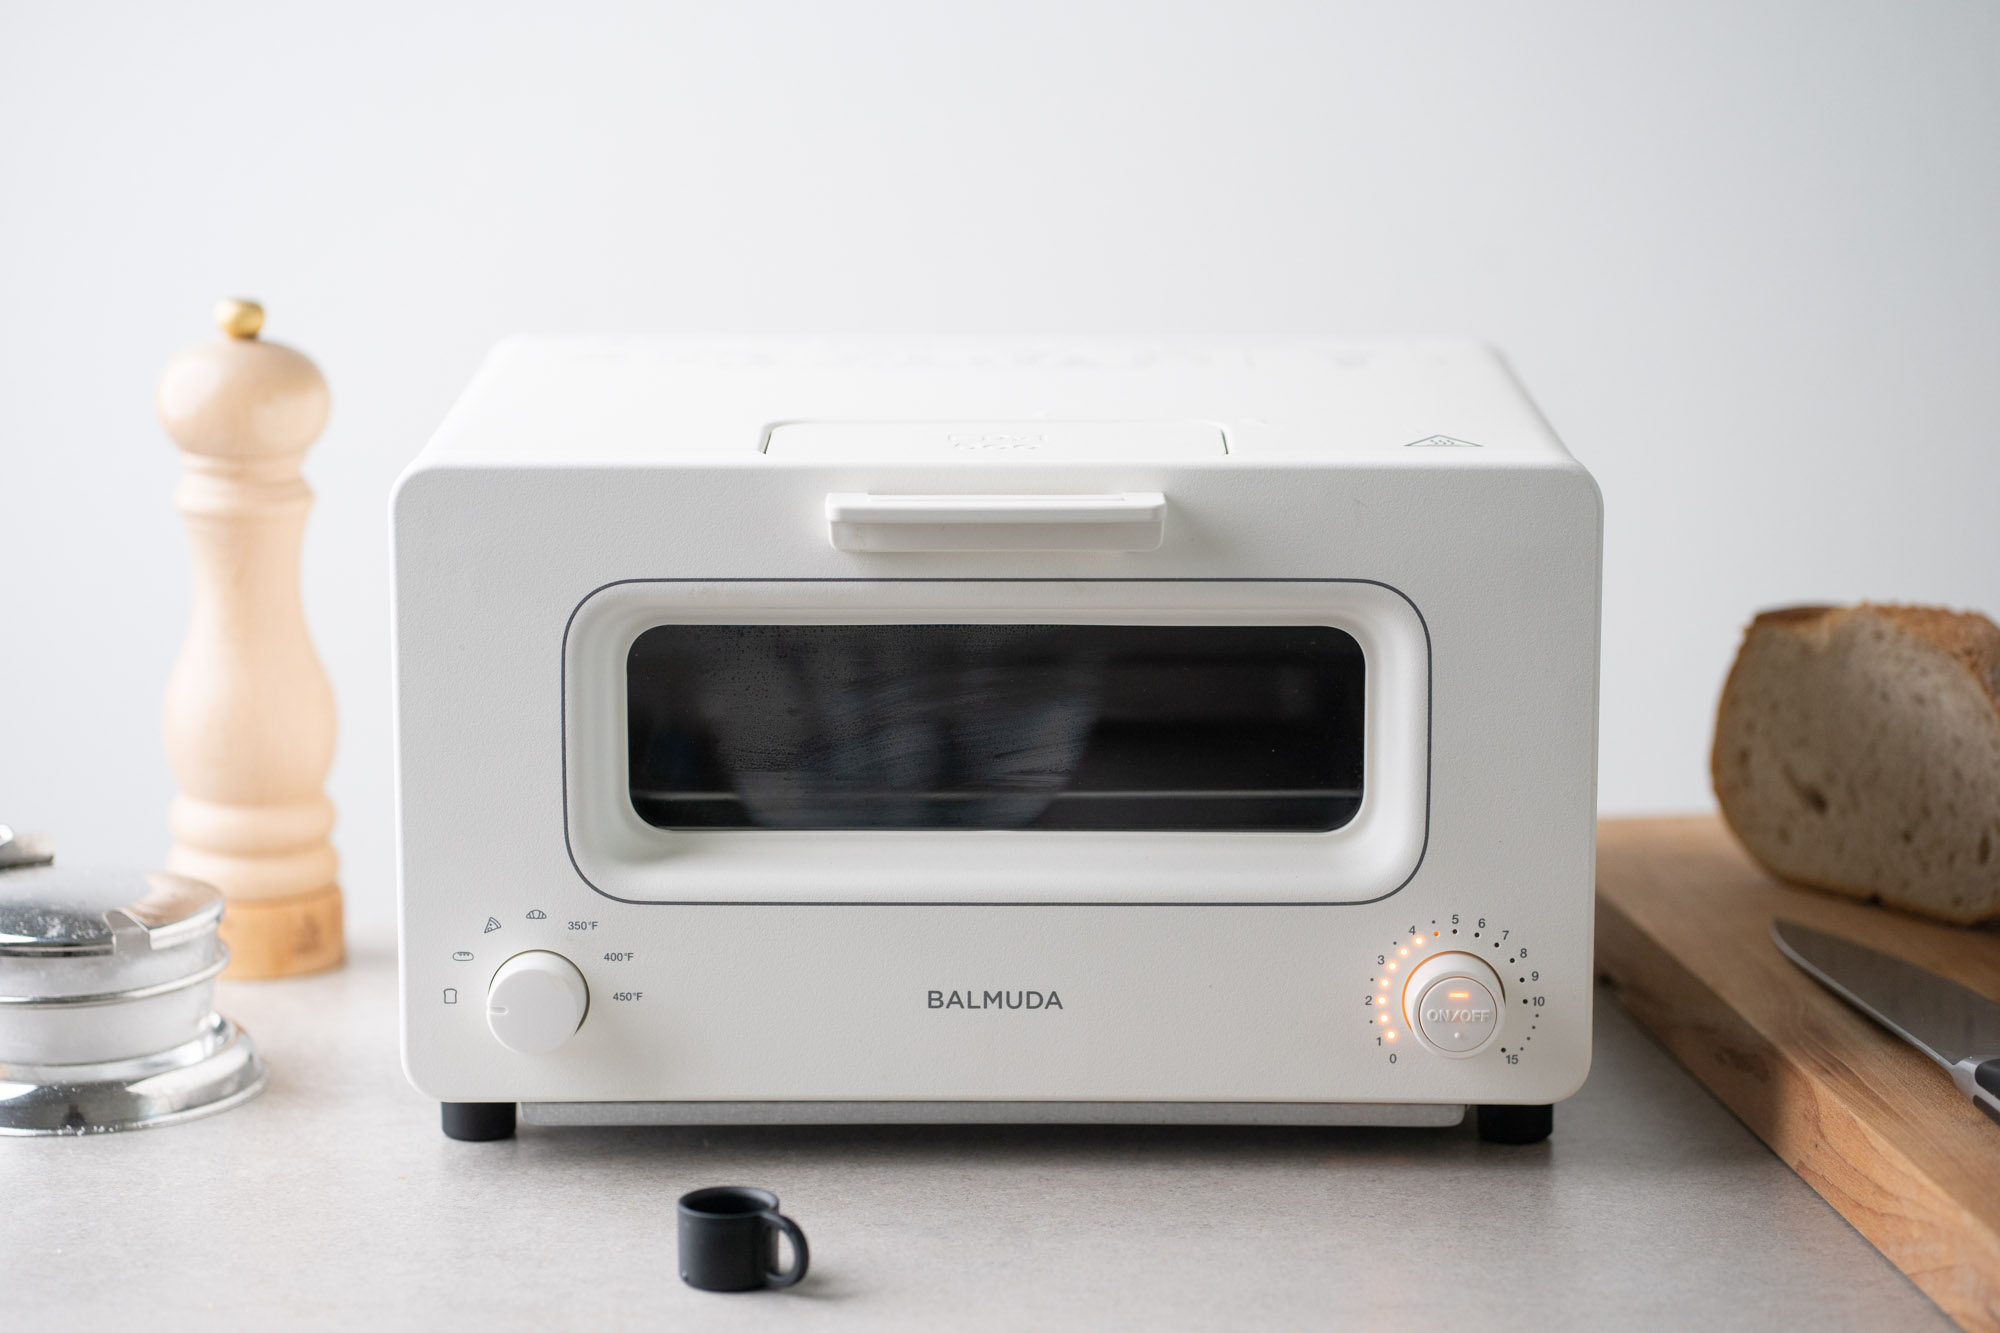 Balmuda The Toaster Oven Review - Hungry Huy